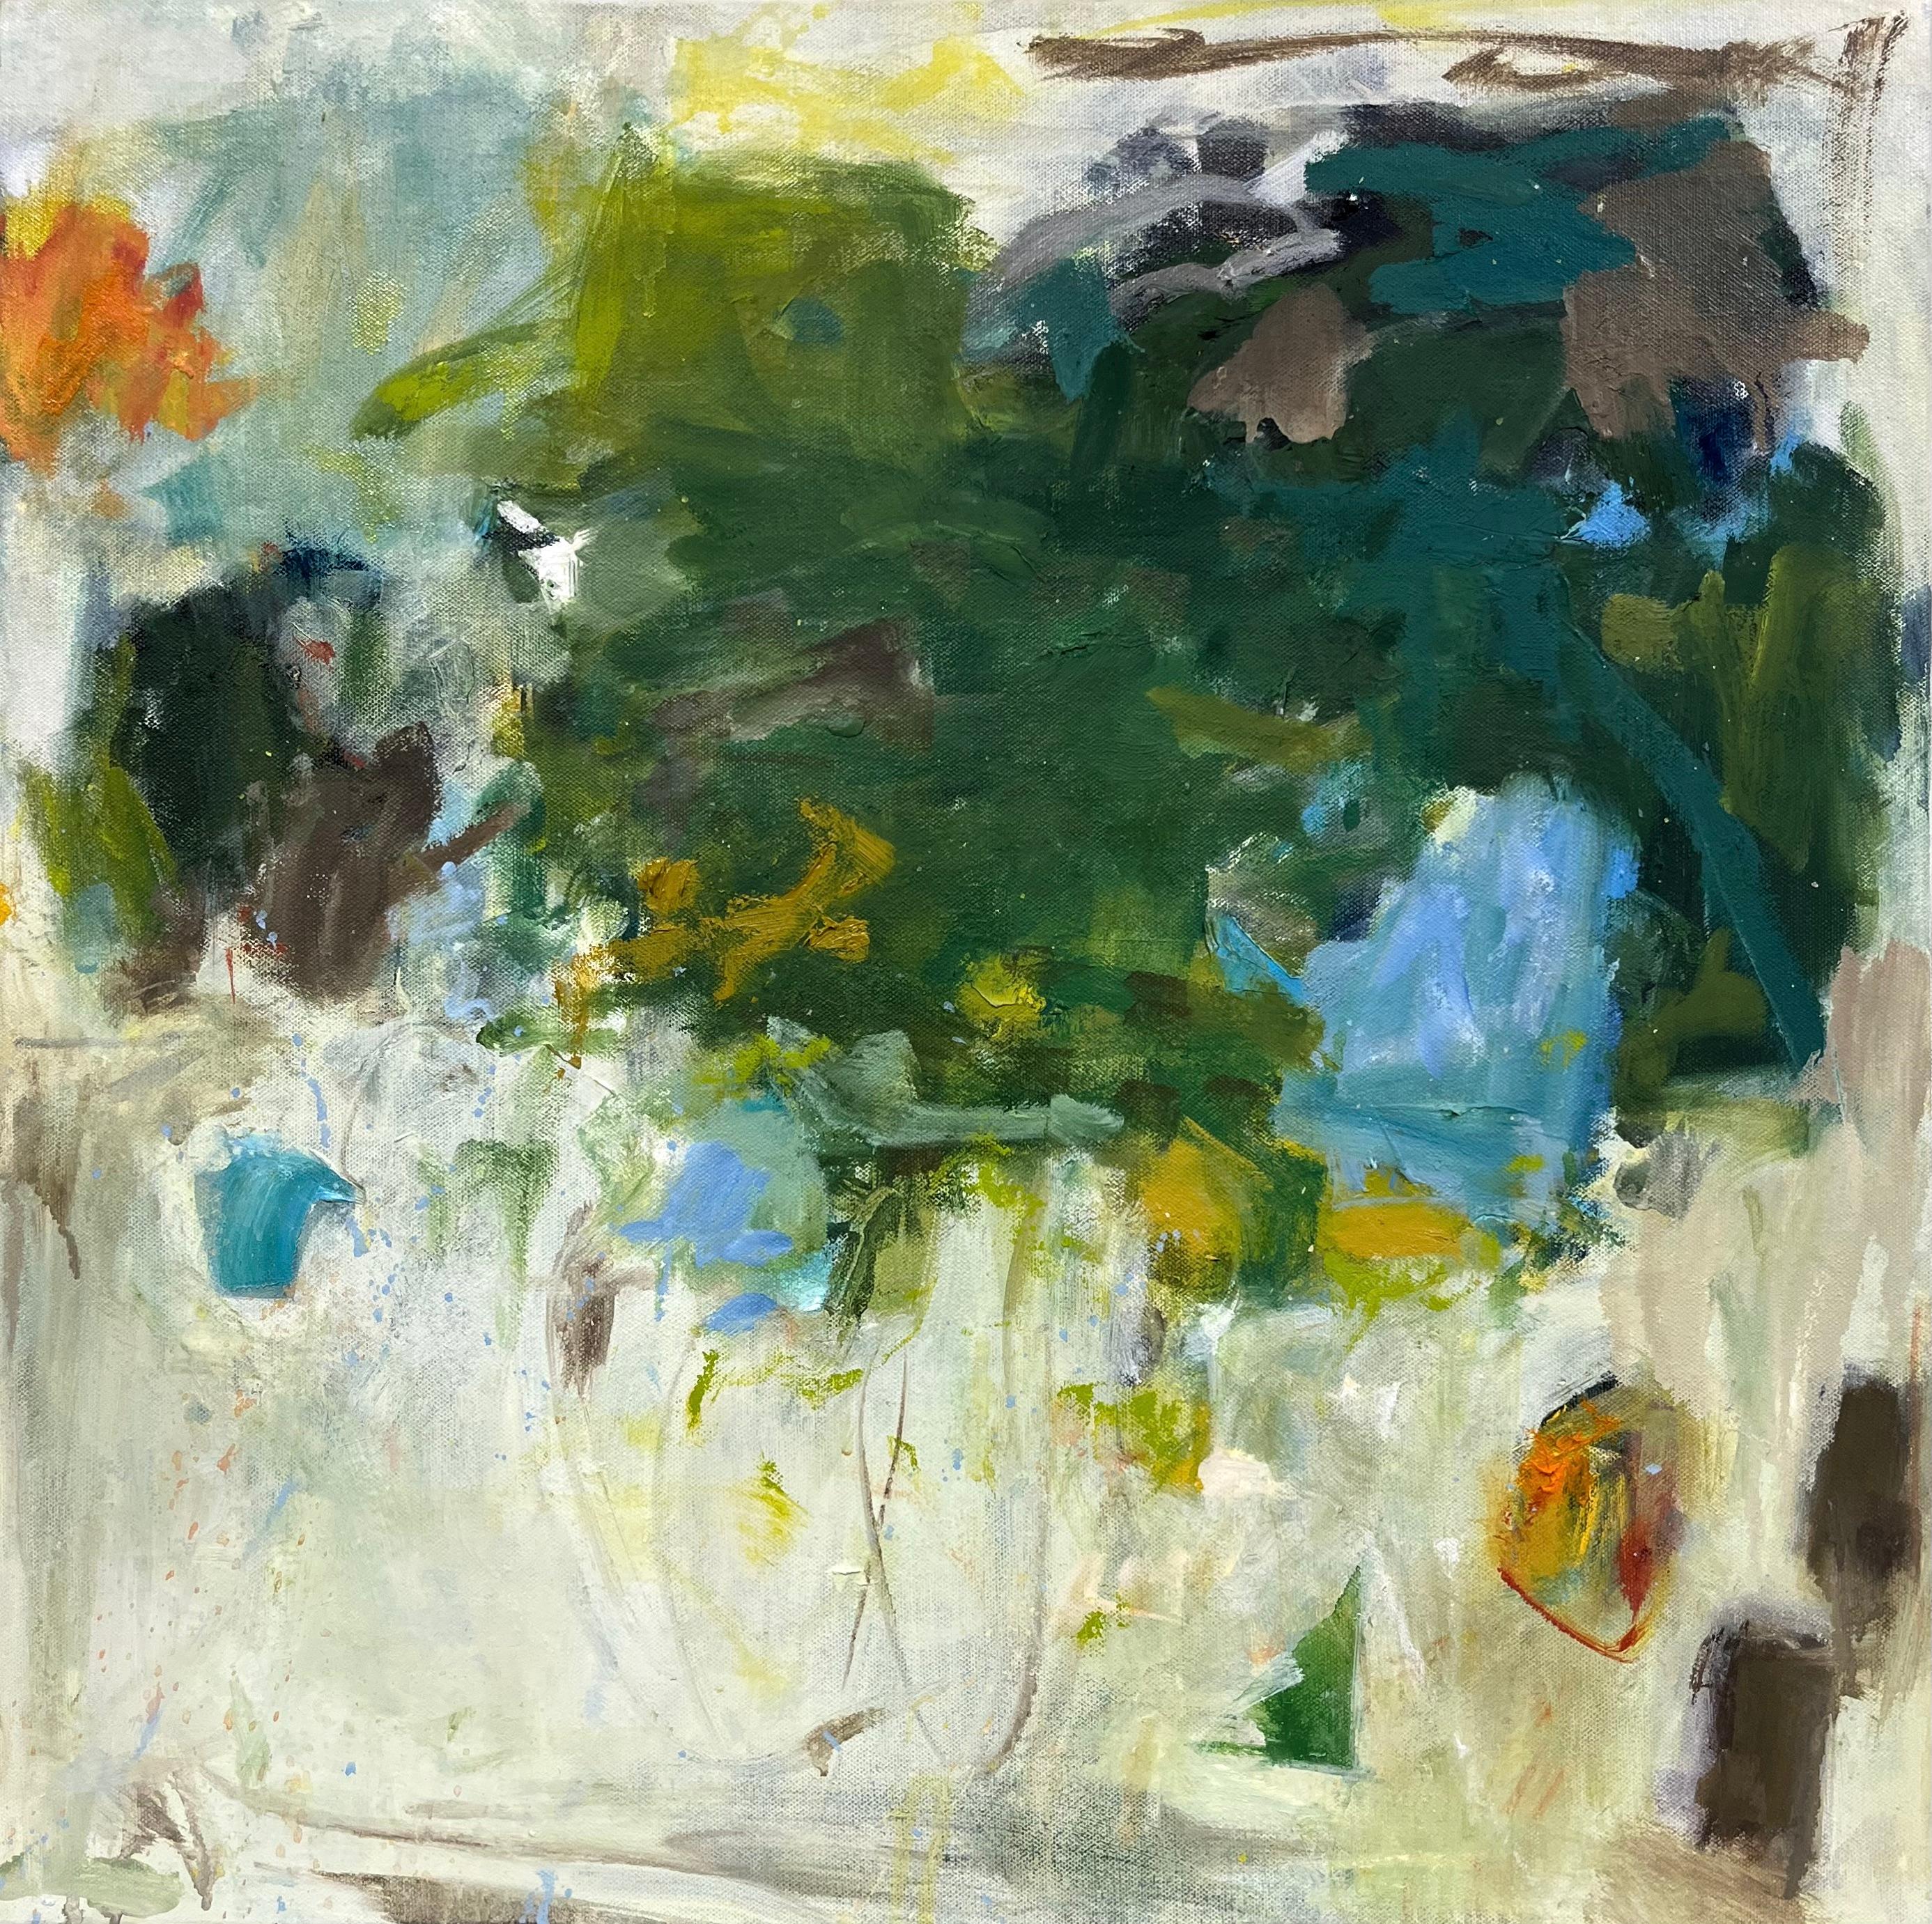 Katherine Bello Figurative Painting - Cloud of Unknowing (Abstract, Expressionist, Deep, Green, Teal, Blue) (~40% OFF)